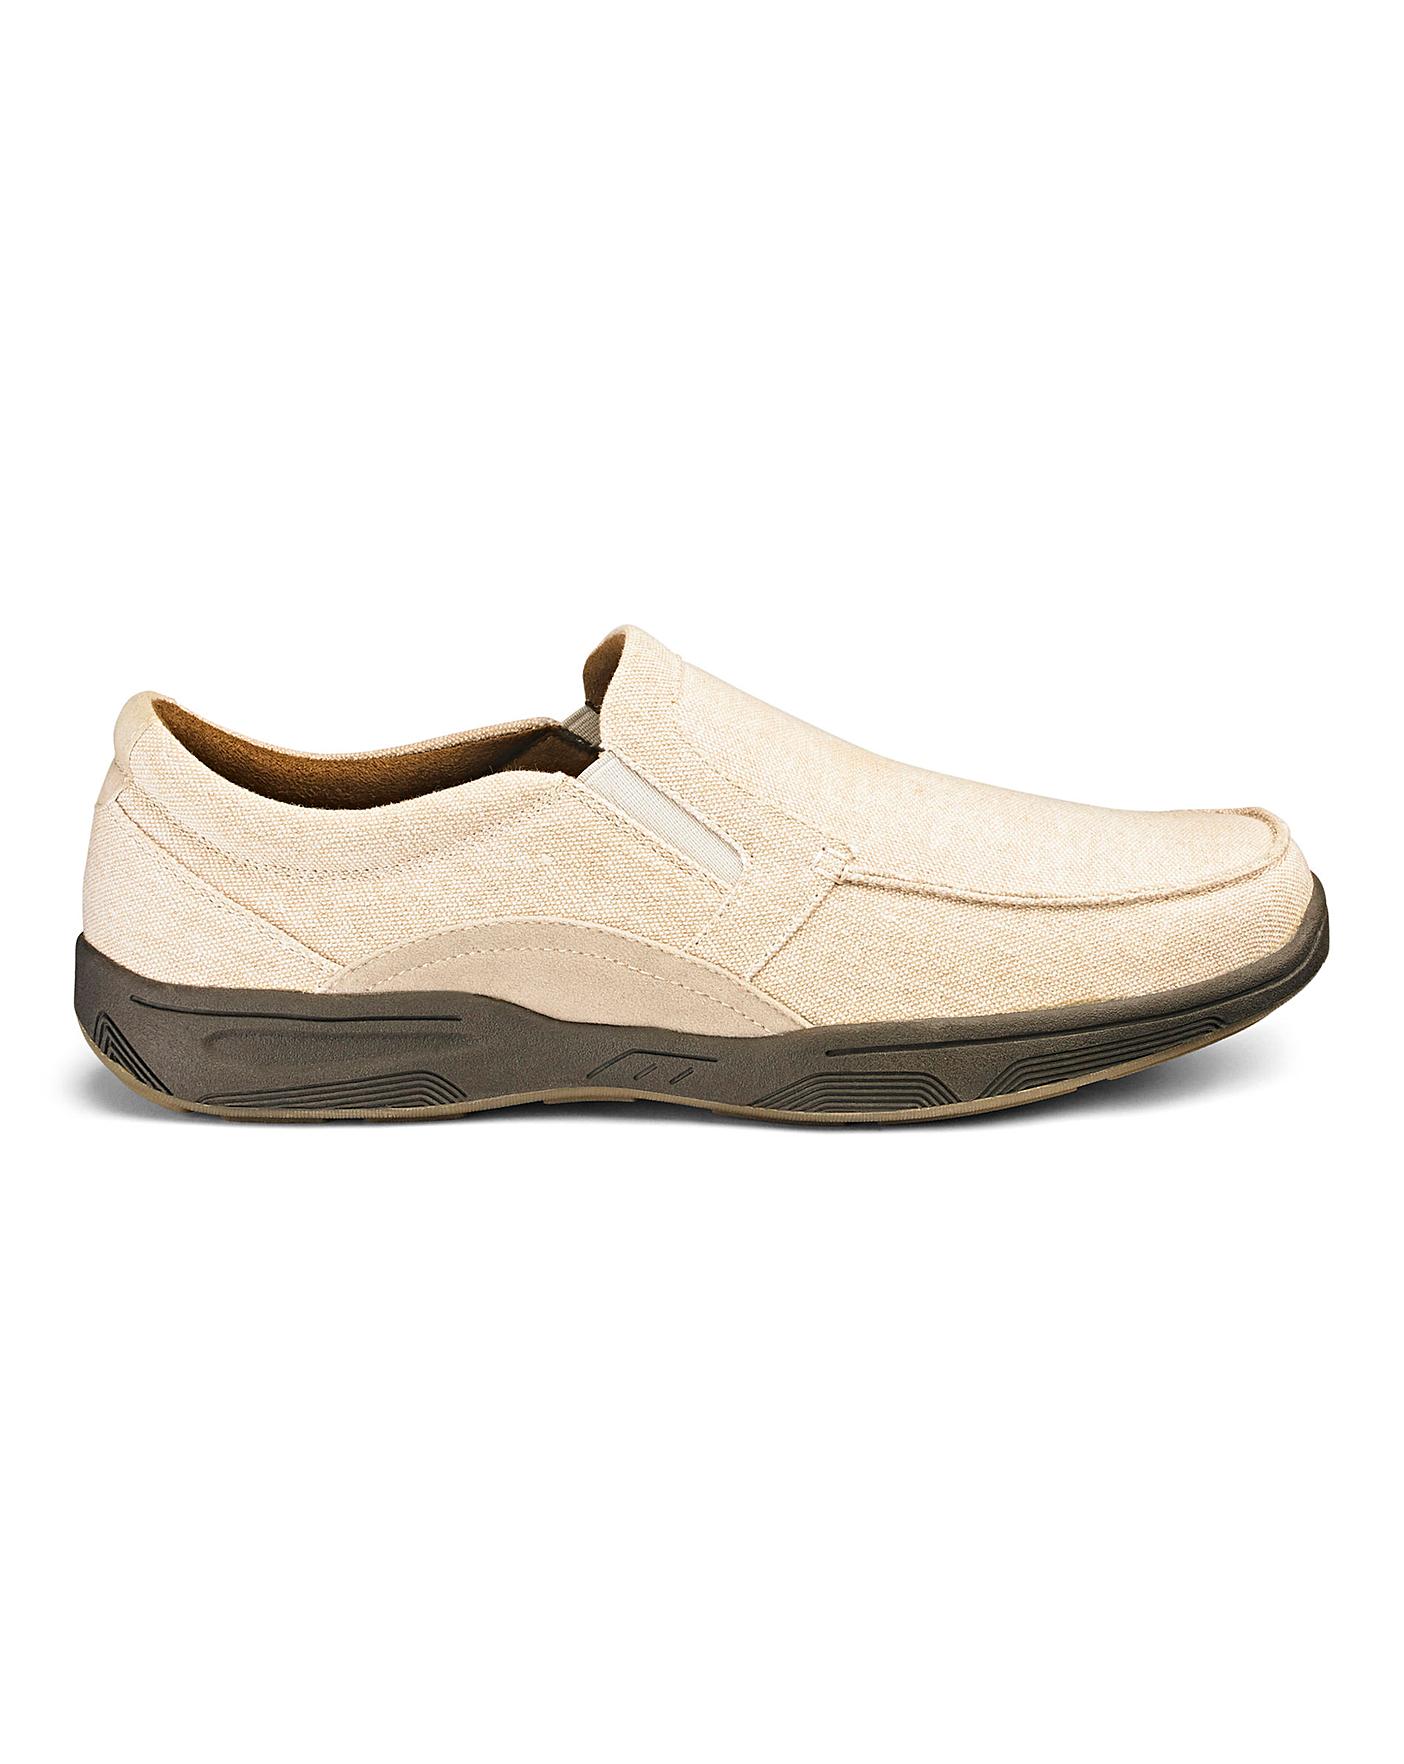 Canvas Slip On Shoes Wide Fit